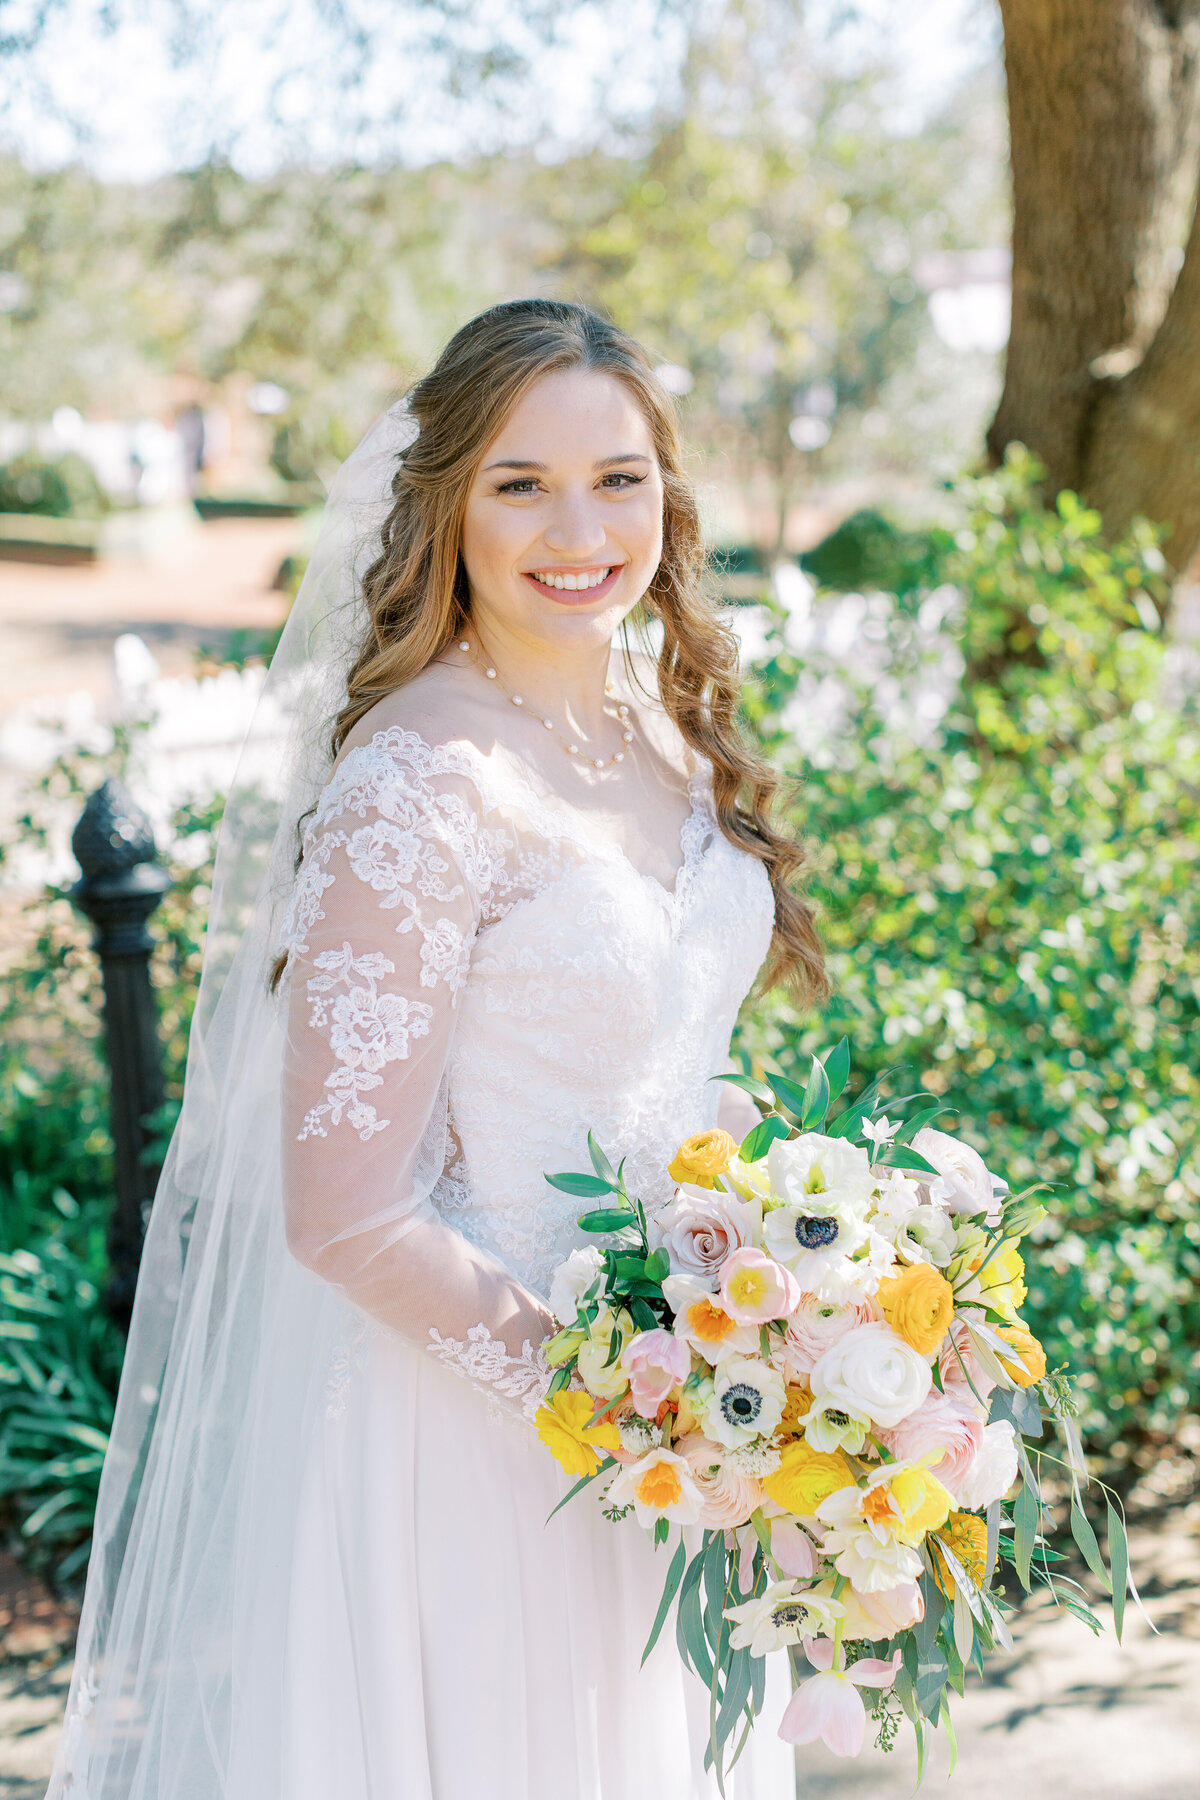 Spring wedding in athens, ga bringing on location hair and makeup